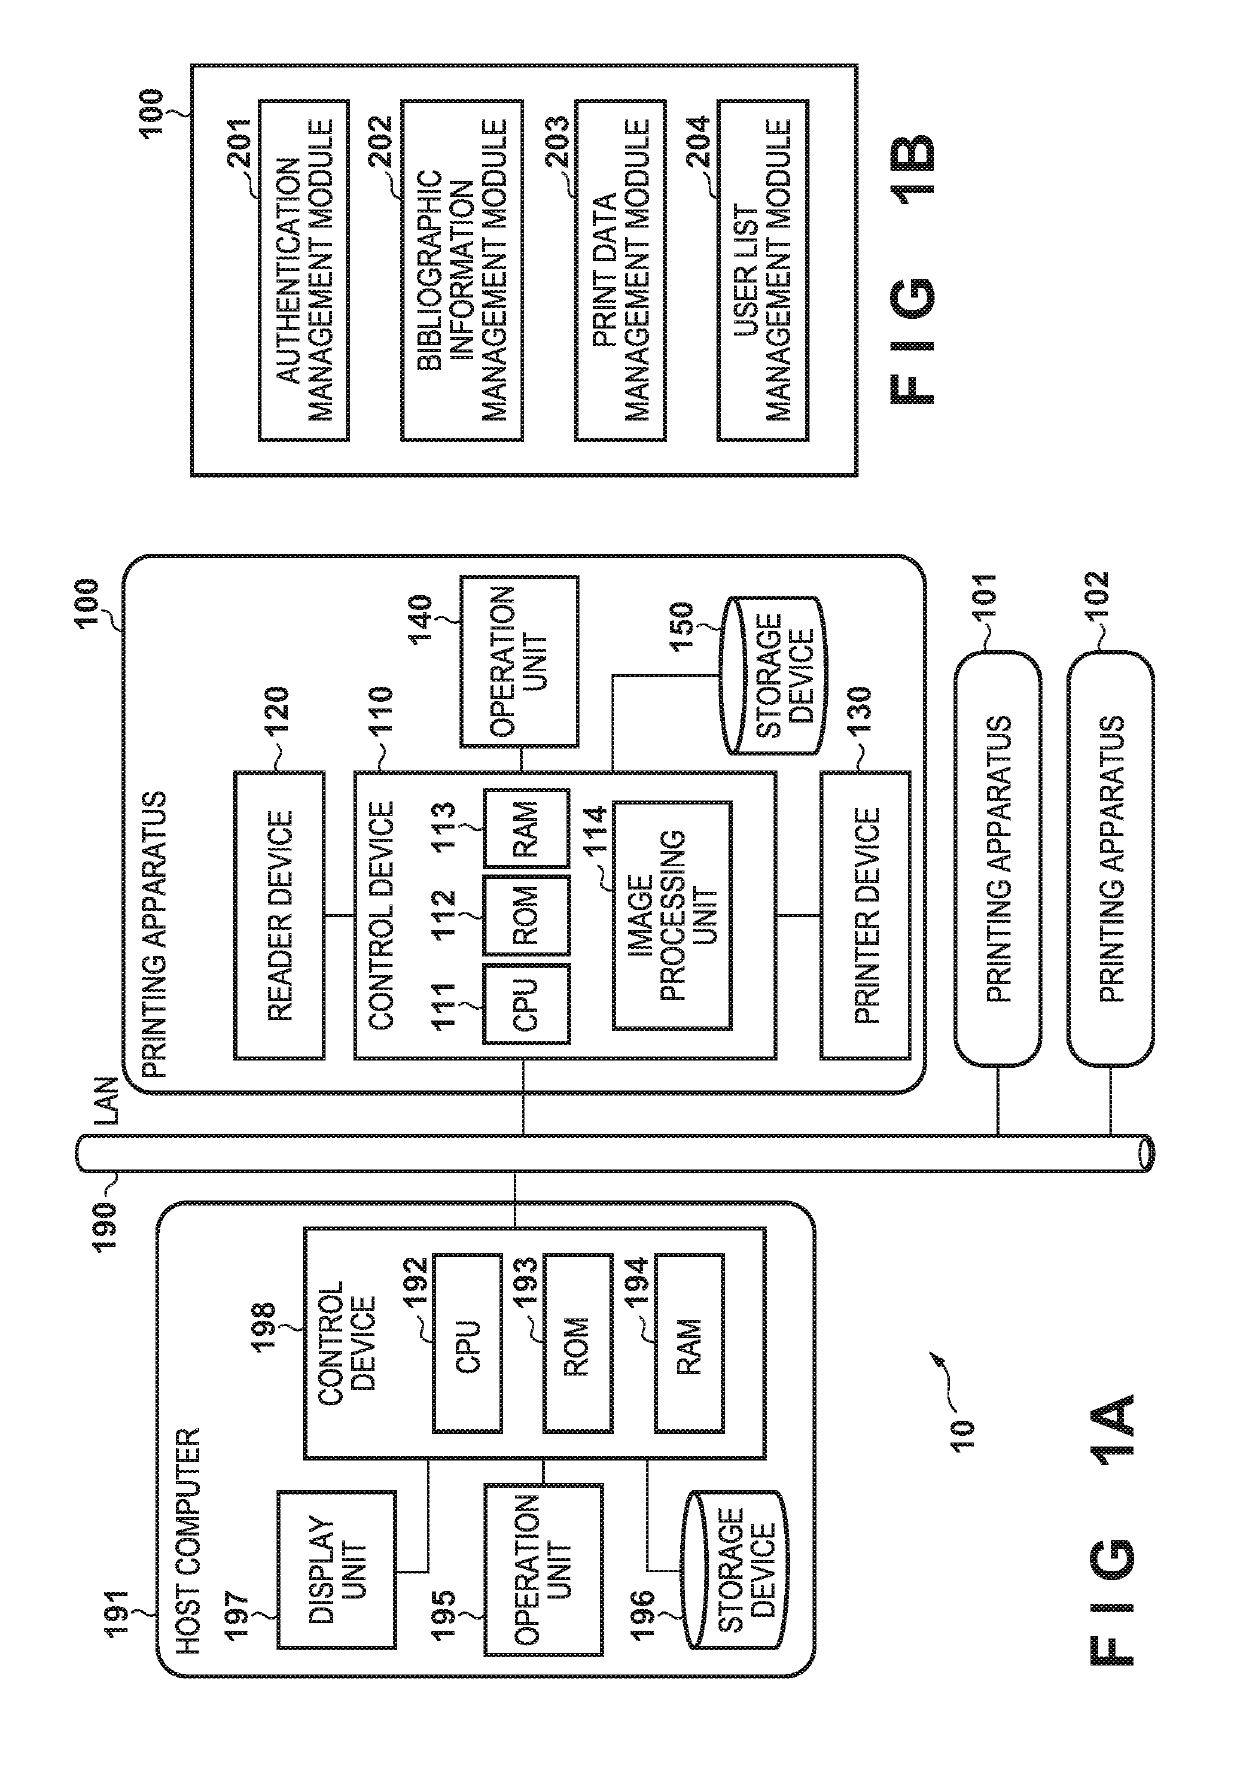 Image forming apparatus that receives bibliographic information including identification information of print data transmitted to other image forming apparatuses and obtains user information associated with the print data, and related display method and non-transitory computer-readable storage medium storing program